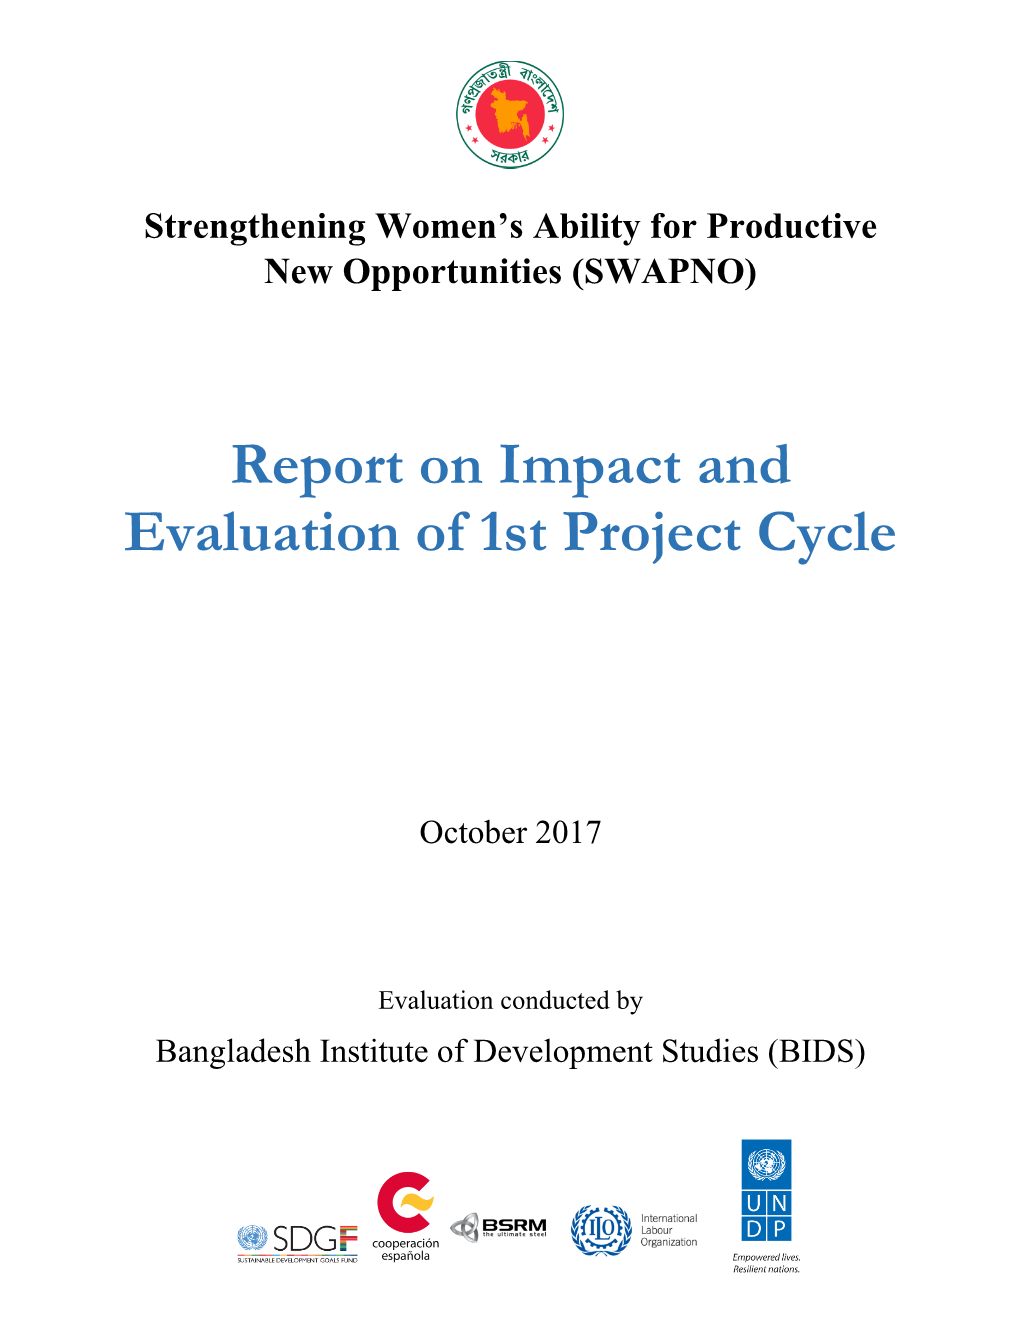 Report on Impact and Evaluation of 1St Project Cycle